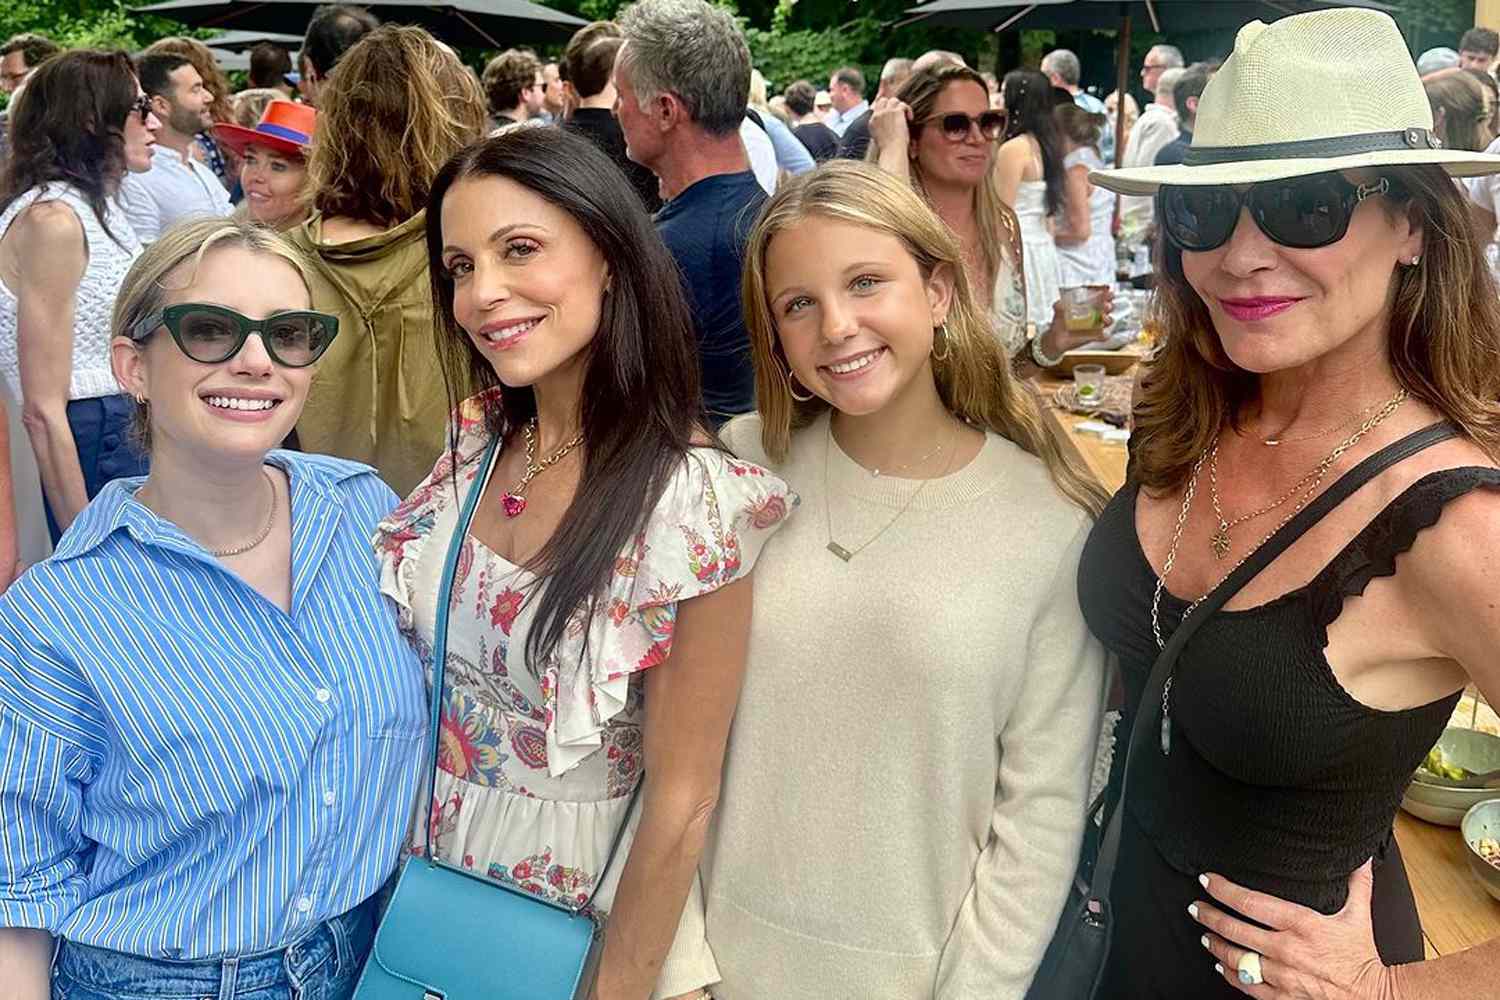 Bethenny Frankel and Luann de Lesseps Reunite at Hamptons Party: 'Hell Hath Frozen Over'